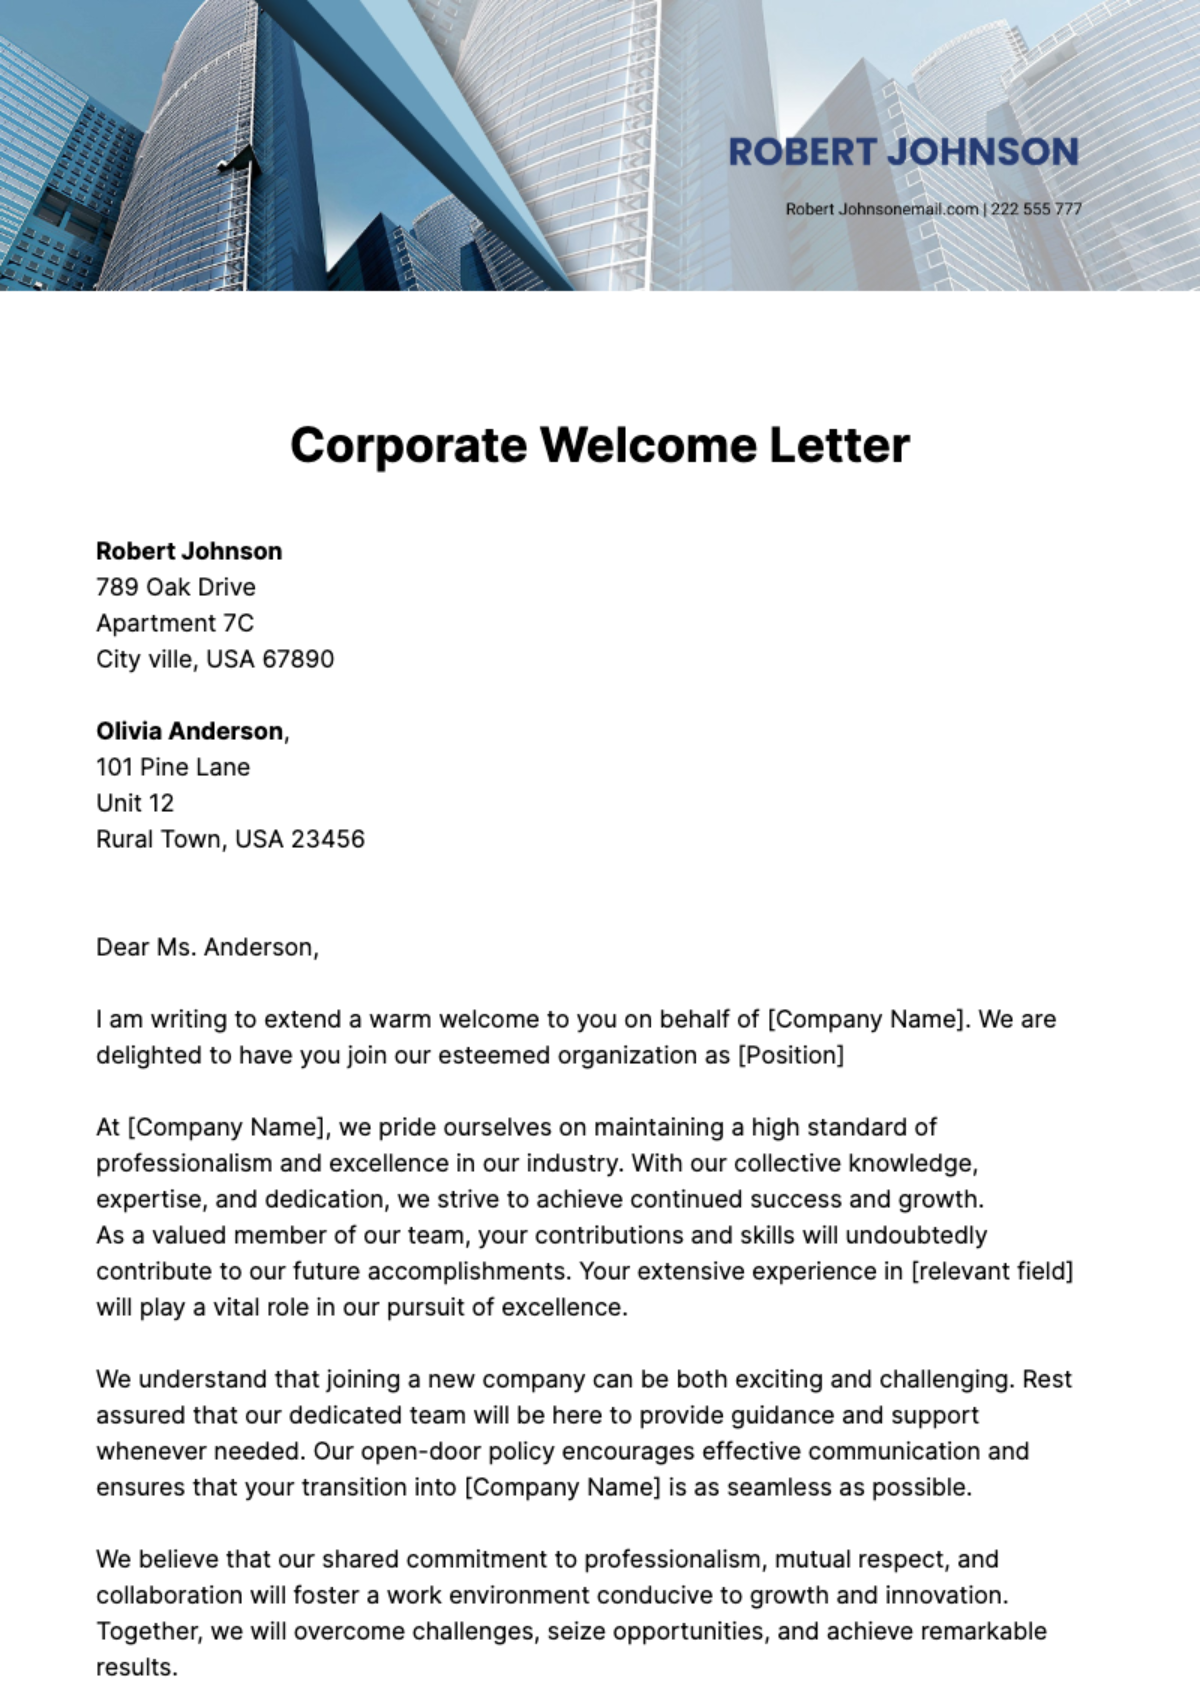 Corporate Welcome Letter Template